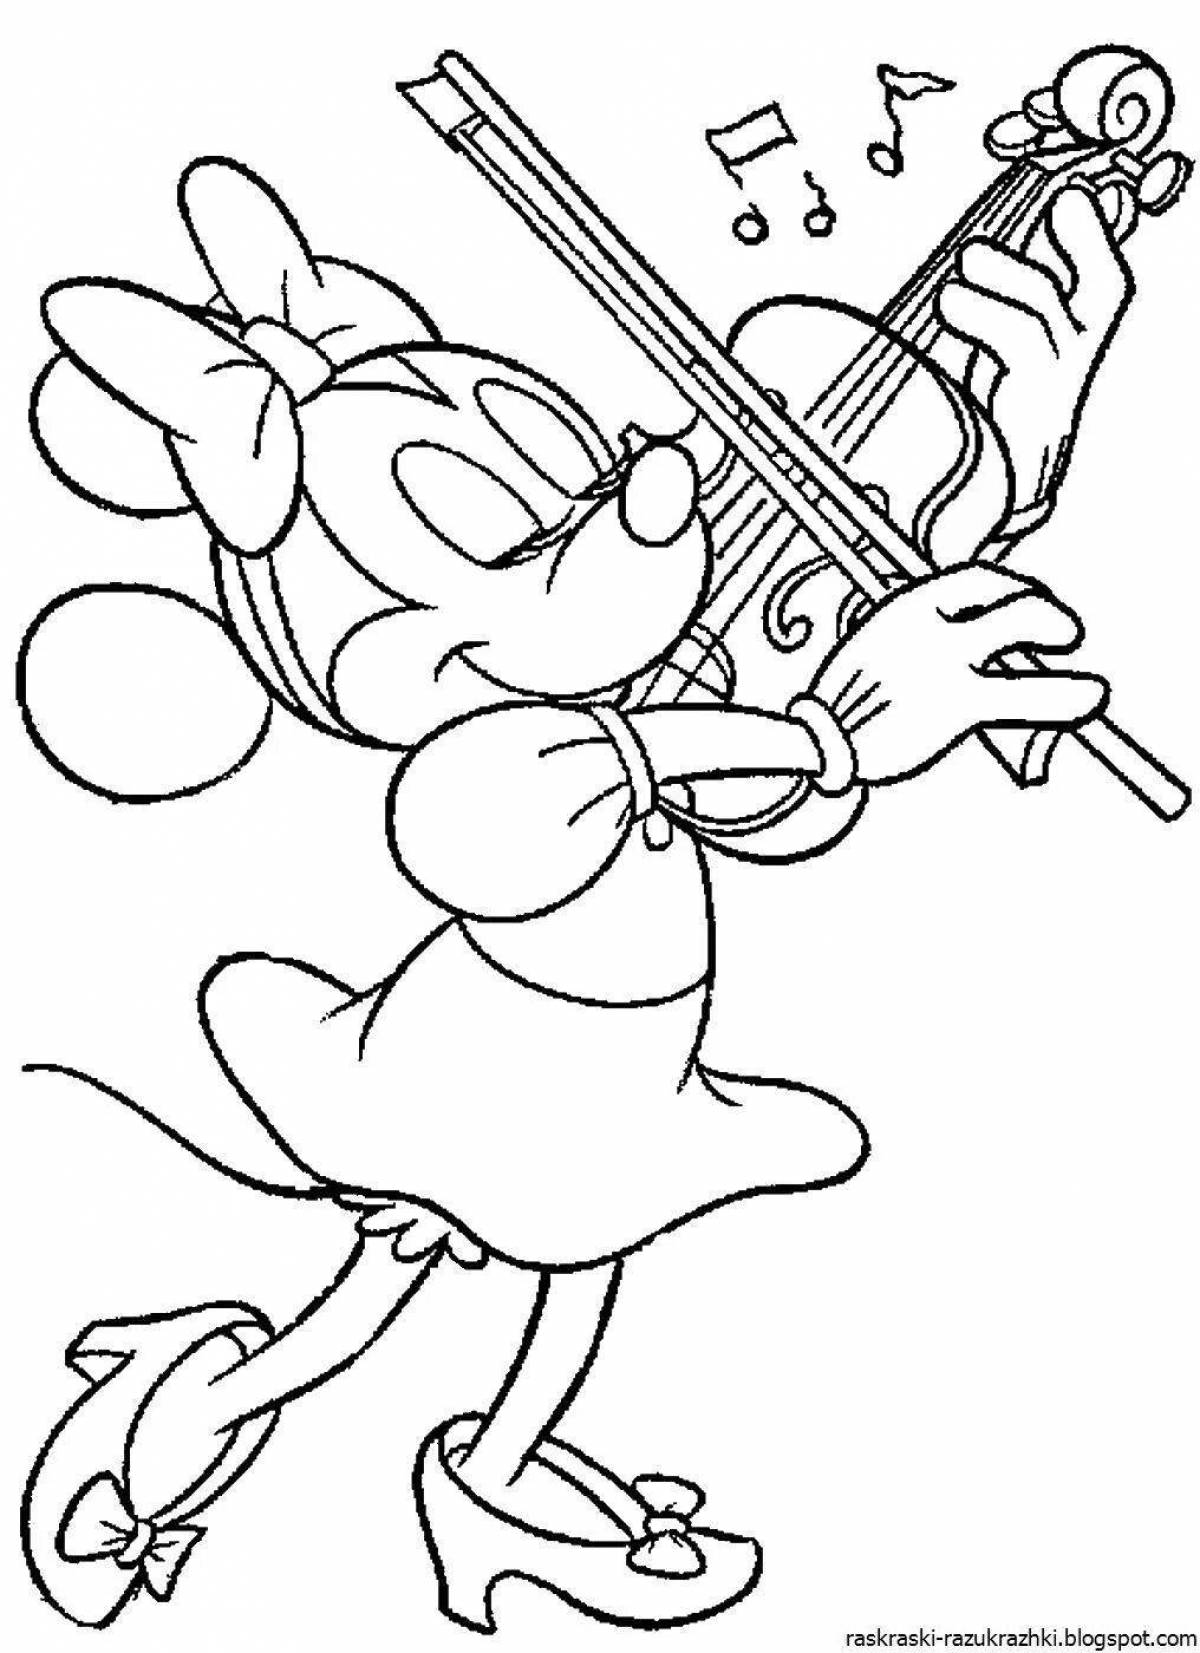 Intriguing coloring book musician